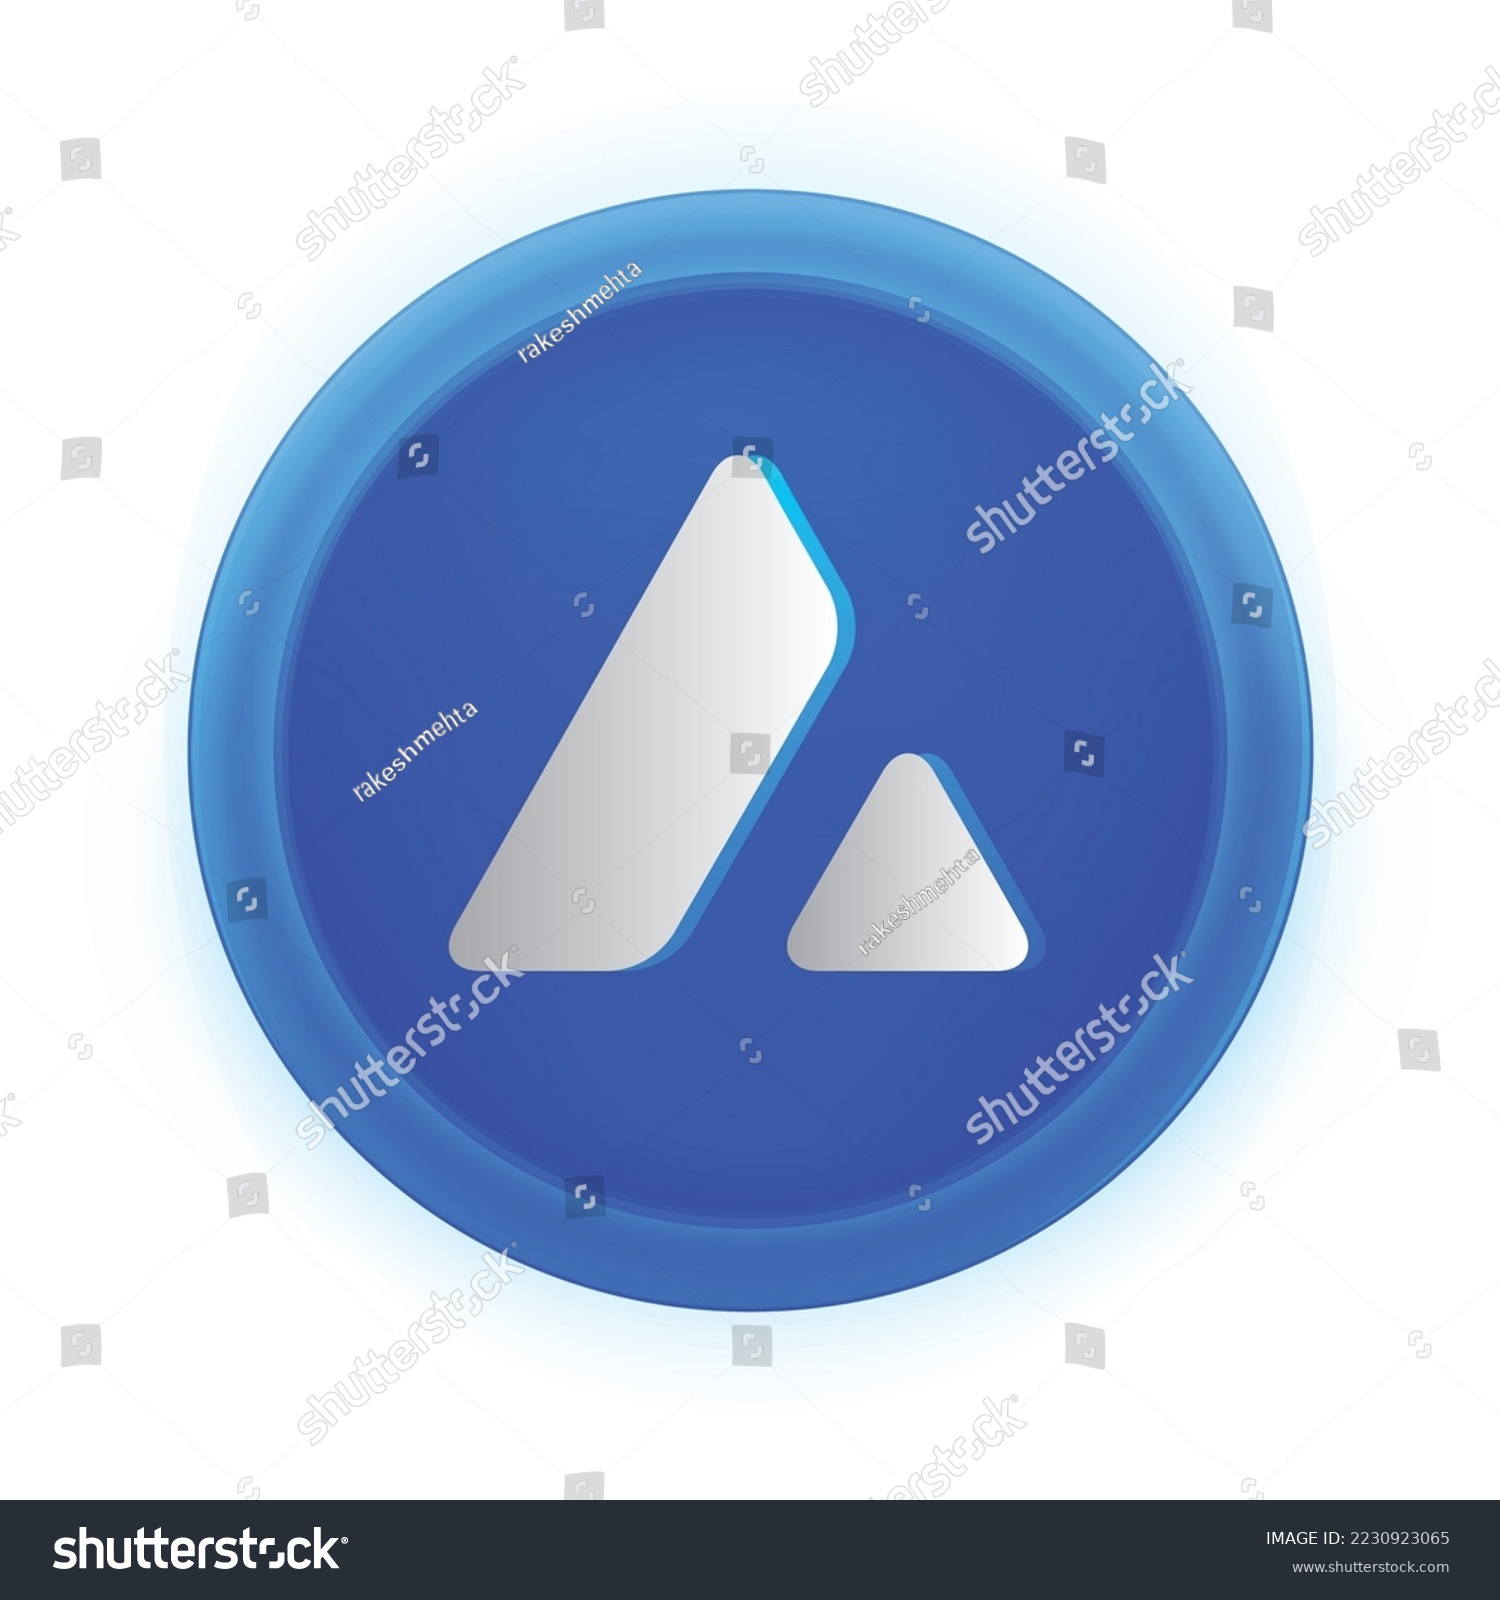 SVG of Avalanche (AVAX) crypto logo isolated on white background. AVAX Cryptocurrency coin token vector svg